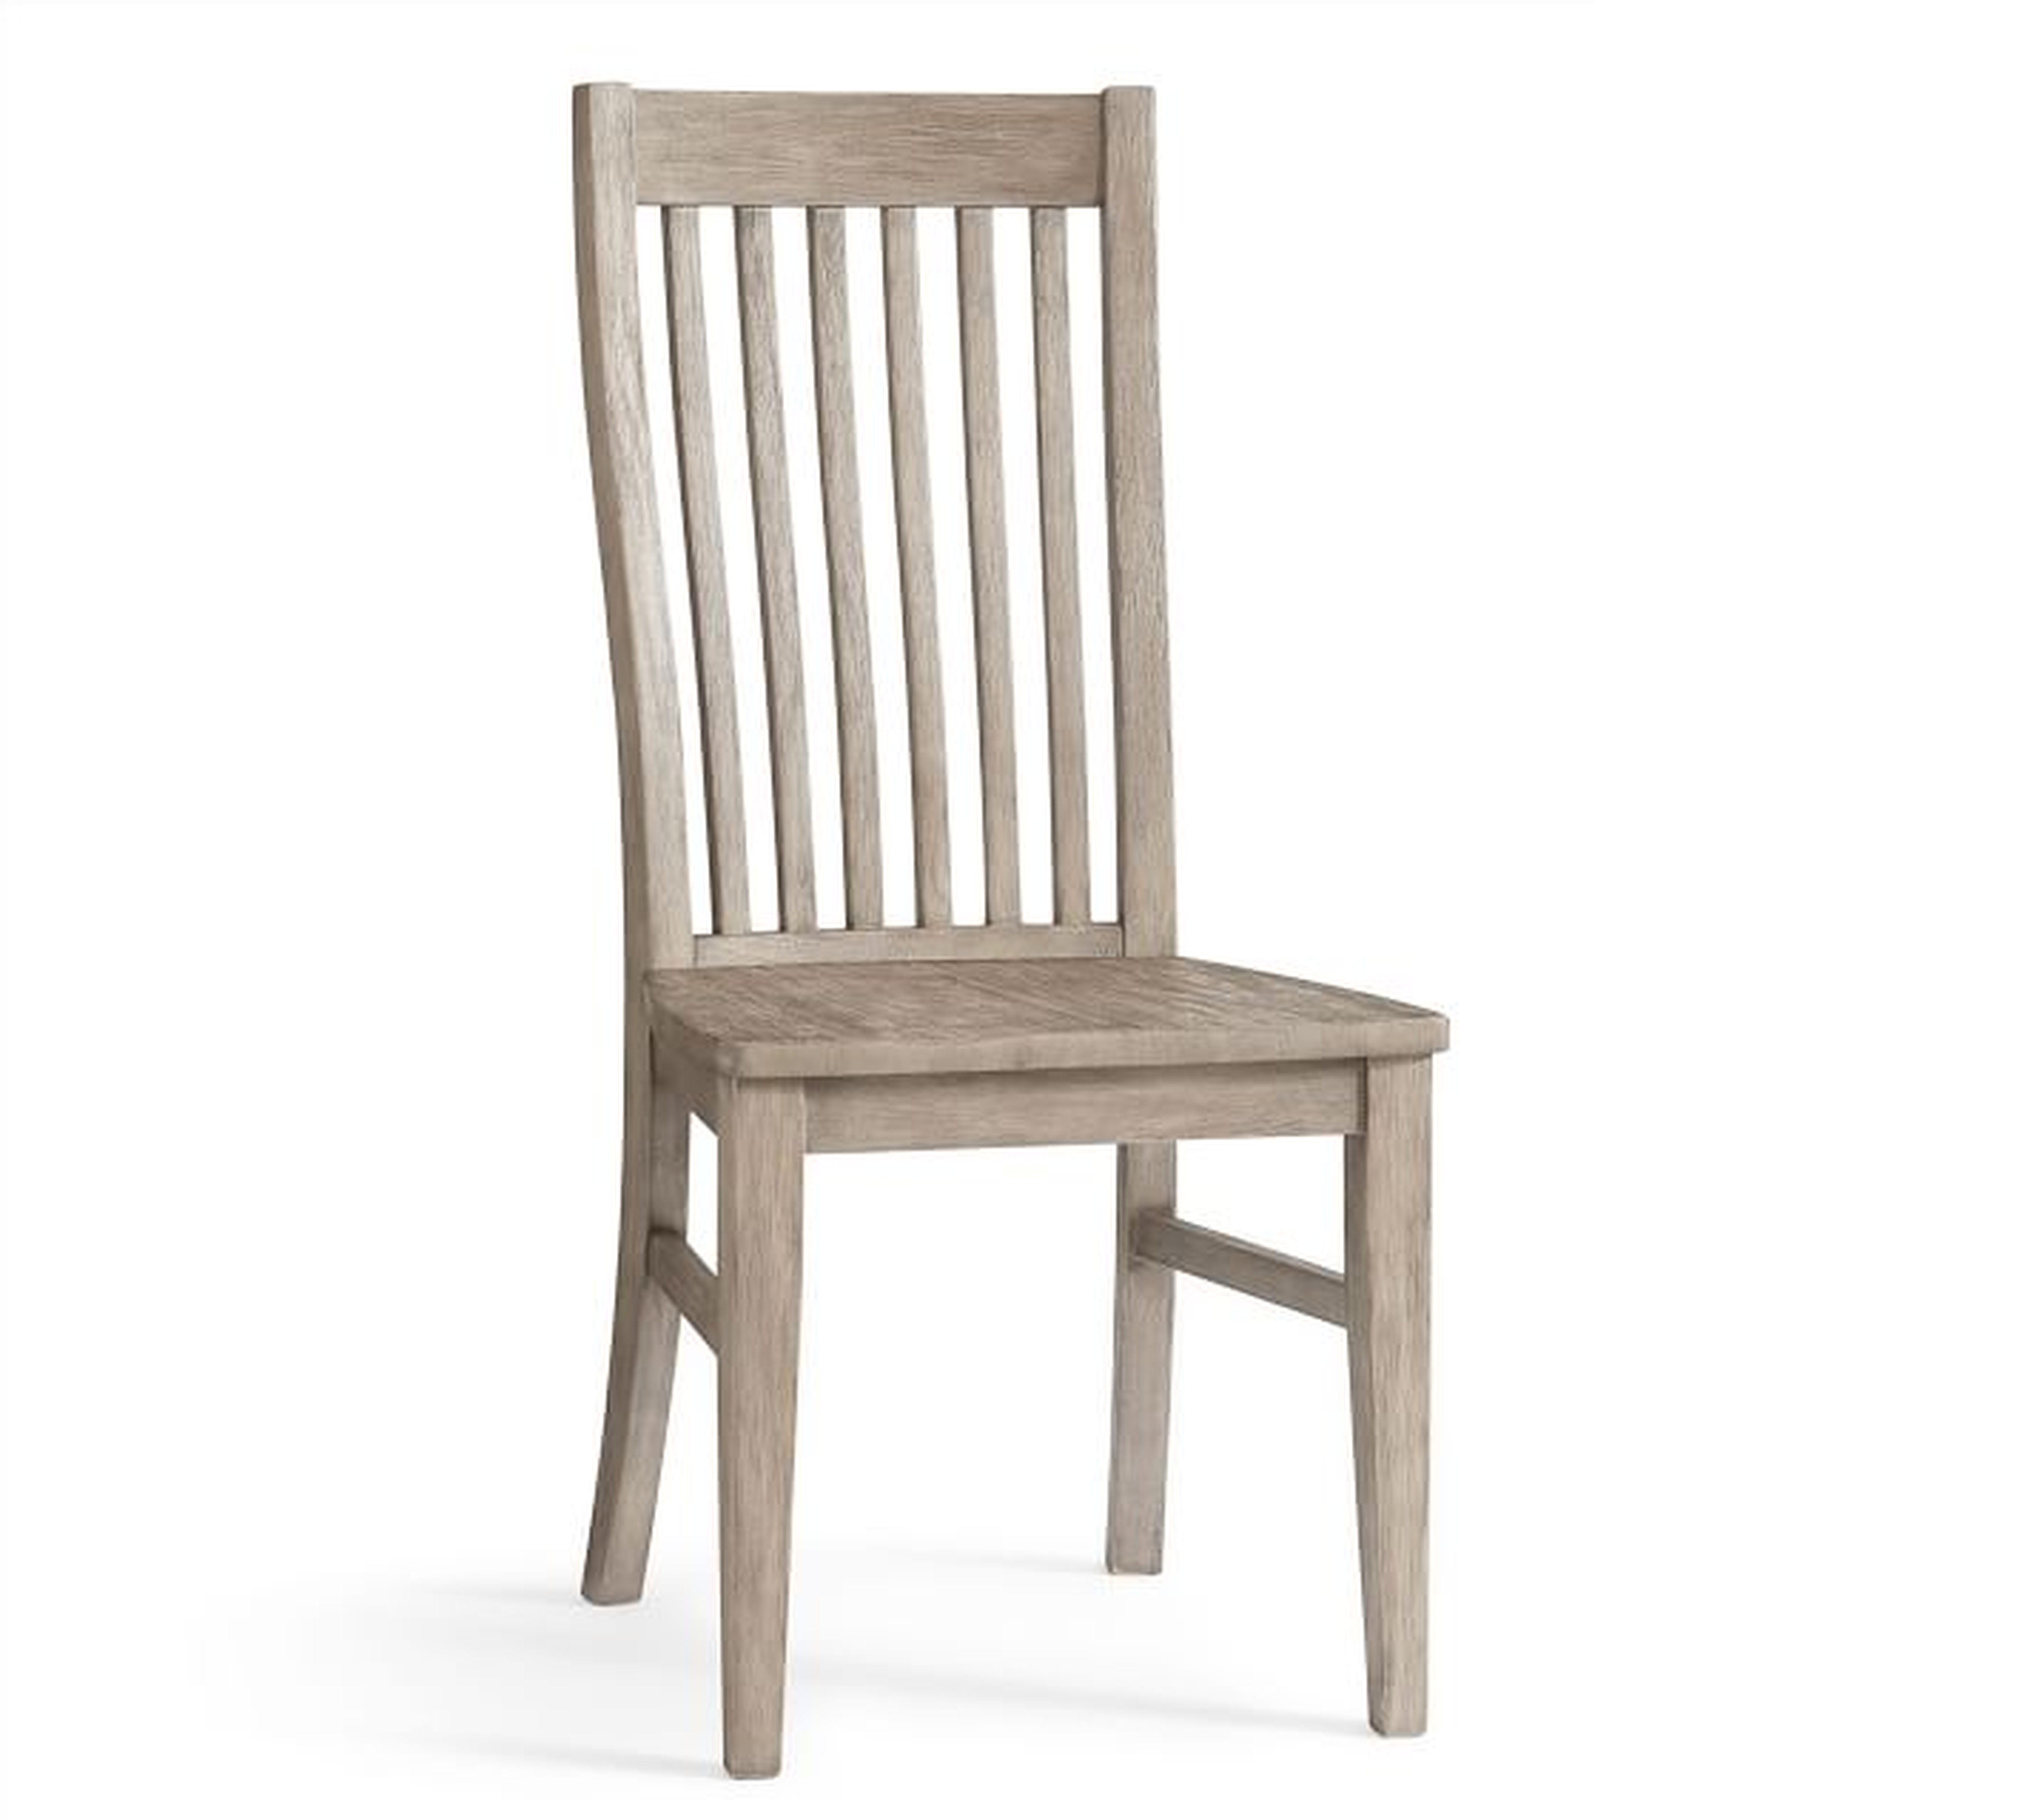 Trieste Side Chair, Gray Wash - Pottery Barn